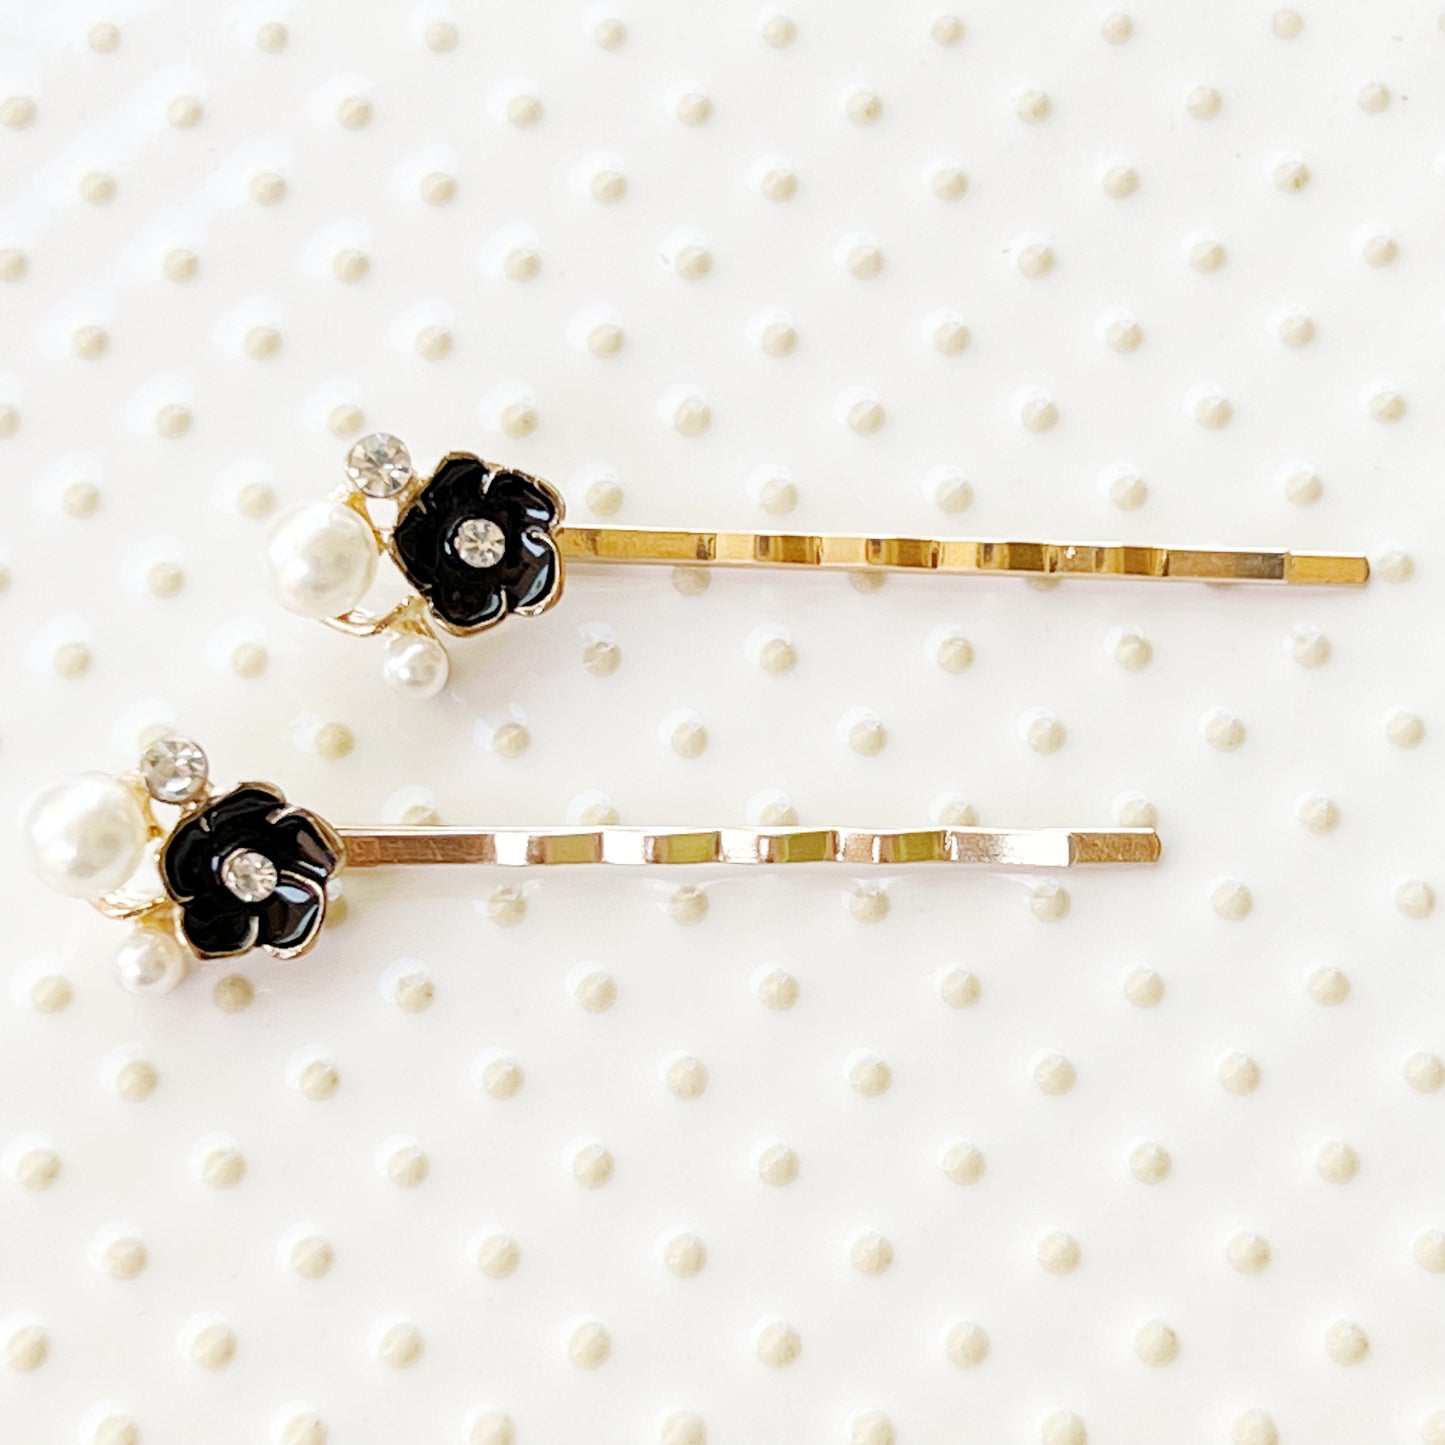 Black Flower Hair Pins - Floral Bobby Pins for Women's Hairstyles | Decorative Hair Accessories and Barrettes